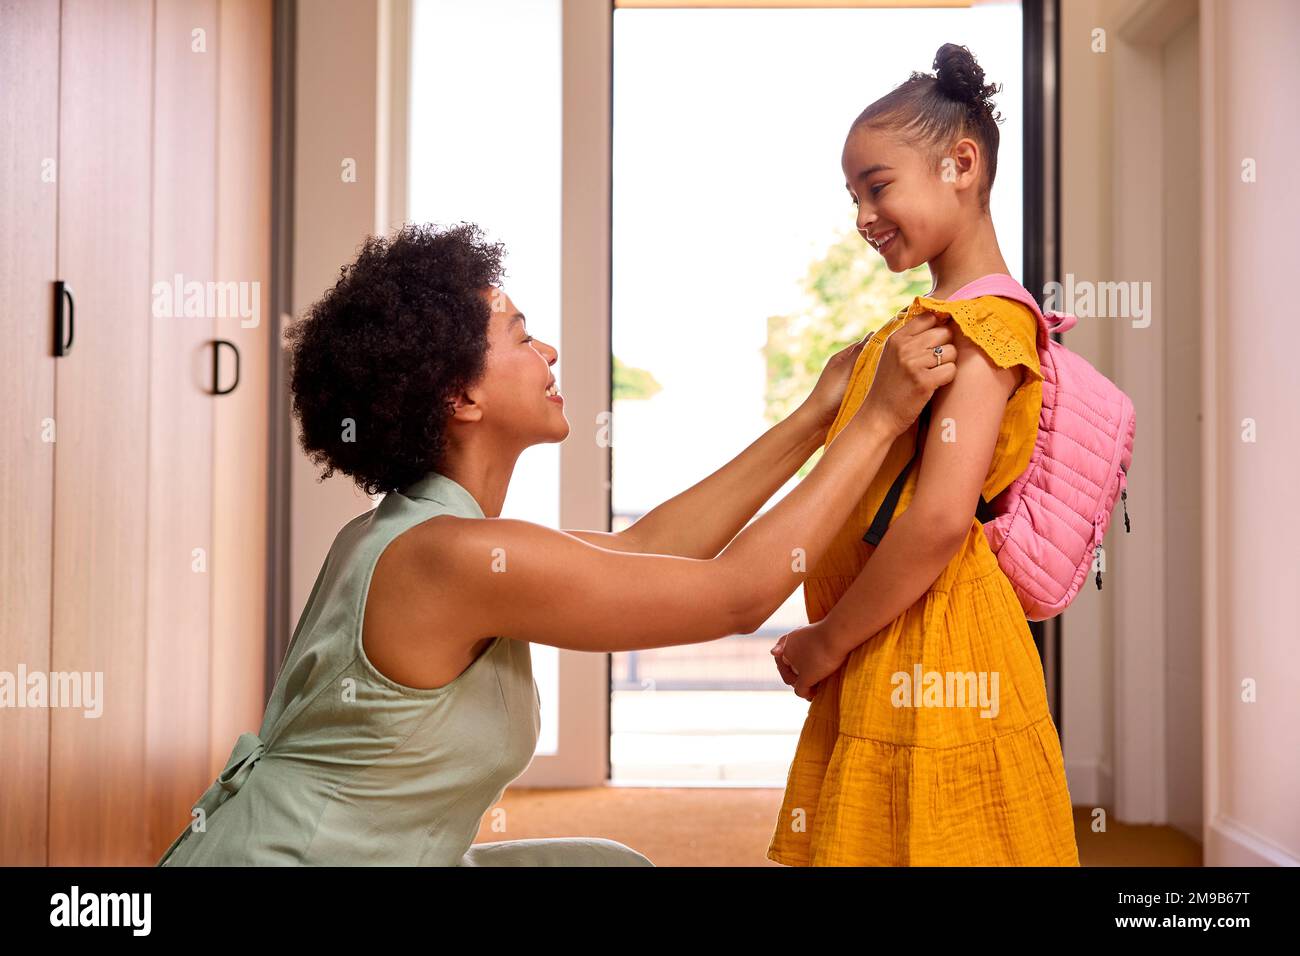 Mother At Home Helping Daughter Getting Ready To Go To School Stock Photo